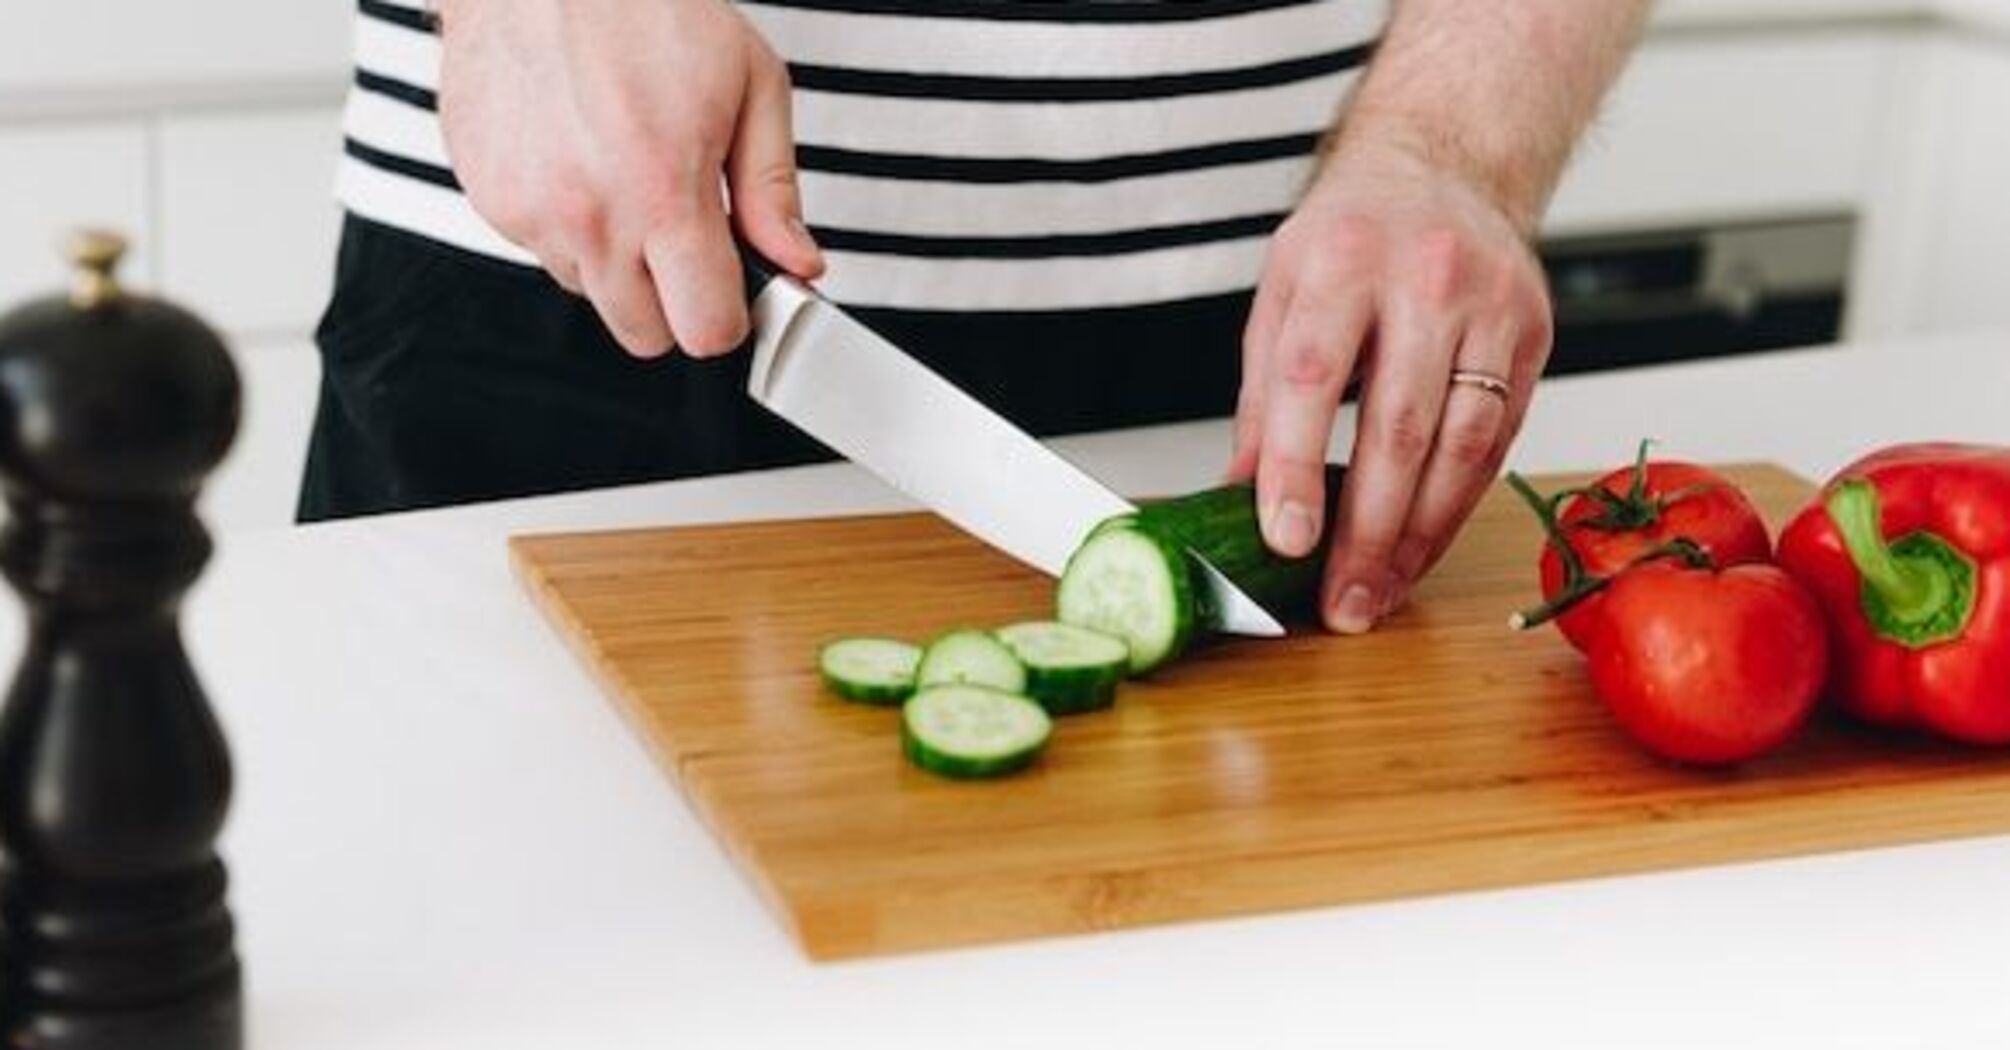 How to clean a cutting board and get rid of odor: effective tips